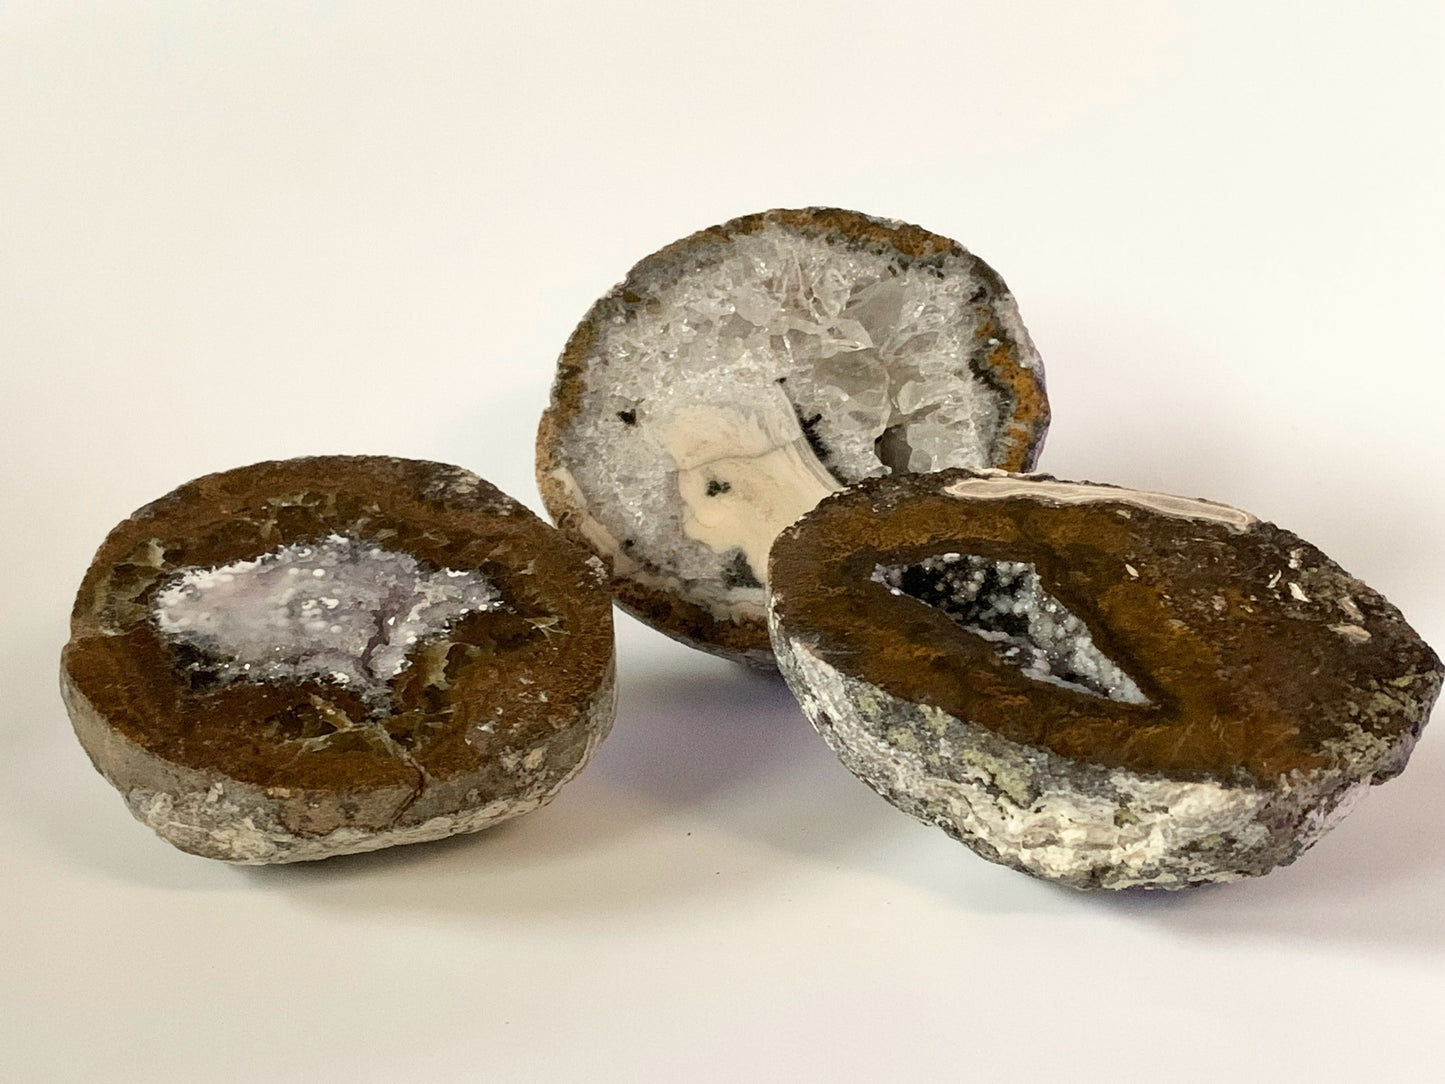 Coconut Geode Cut and Polished